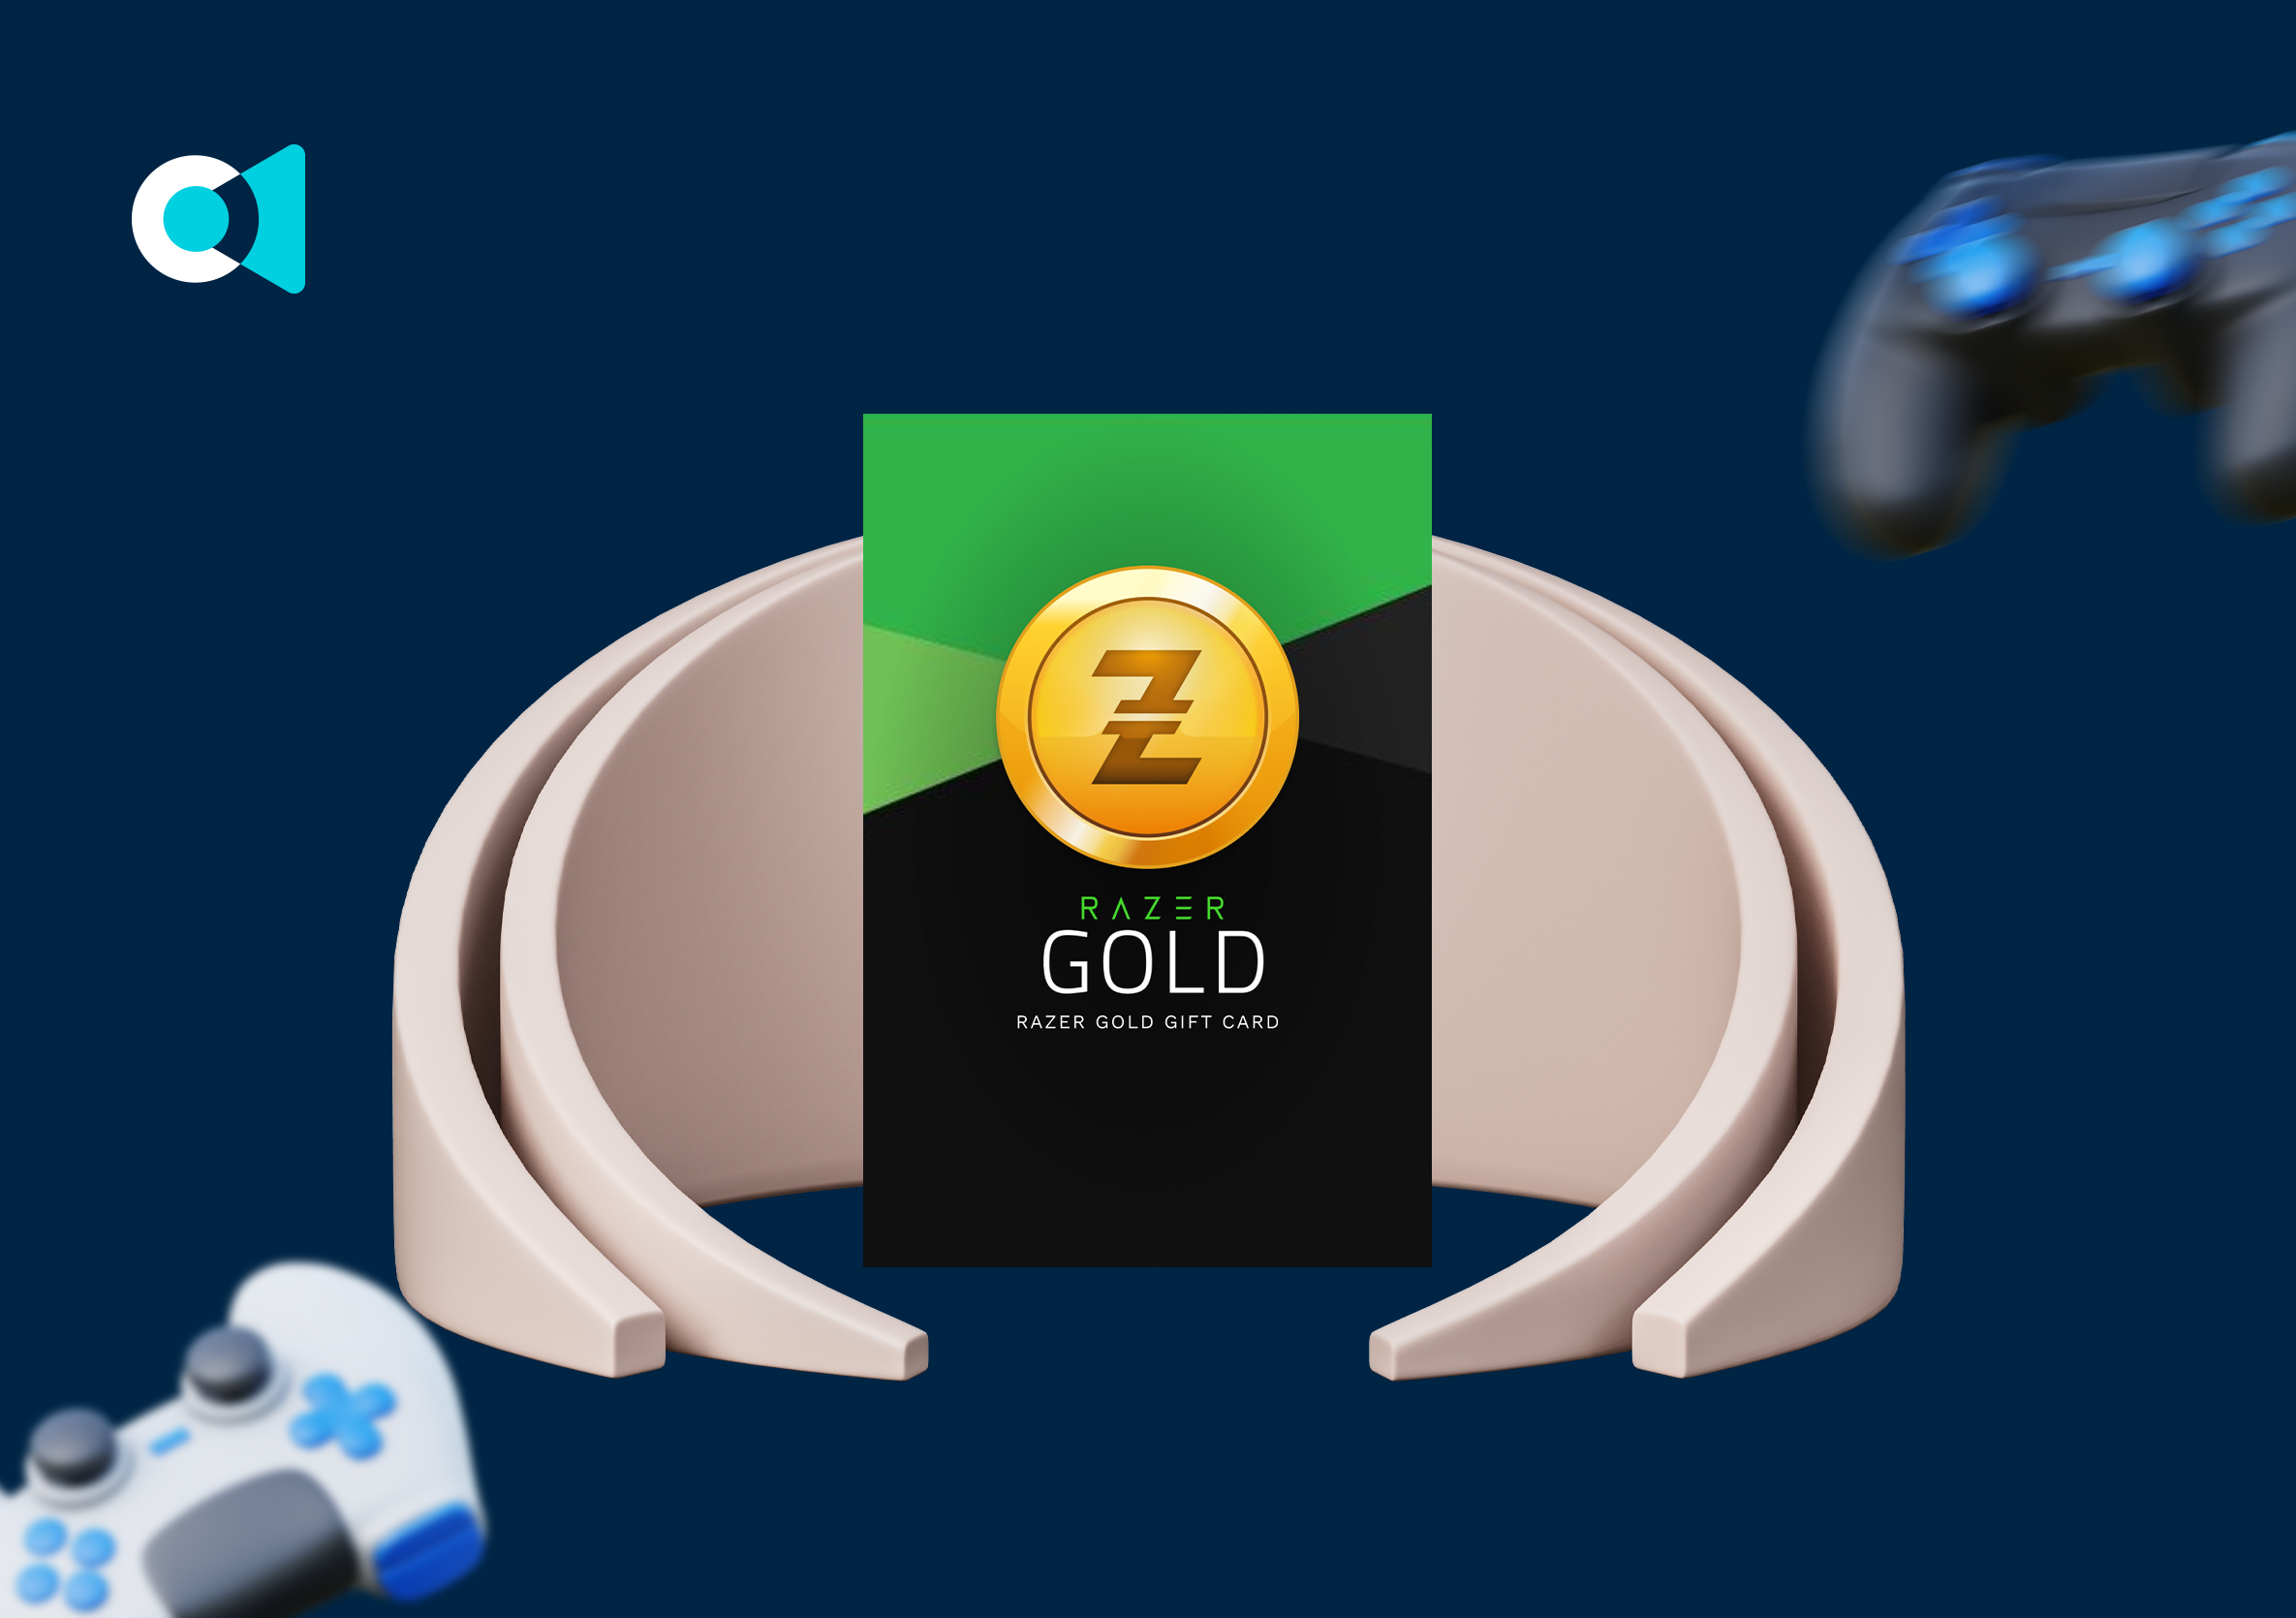 Razer Gold Gift Cards: Everything You Need to Know